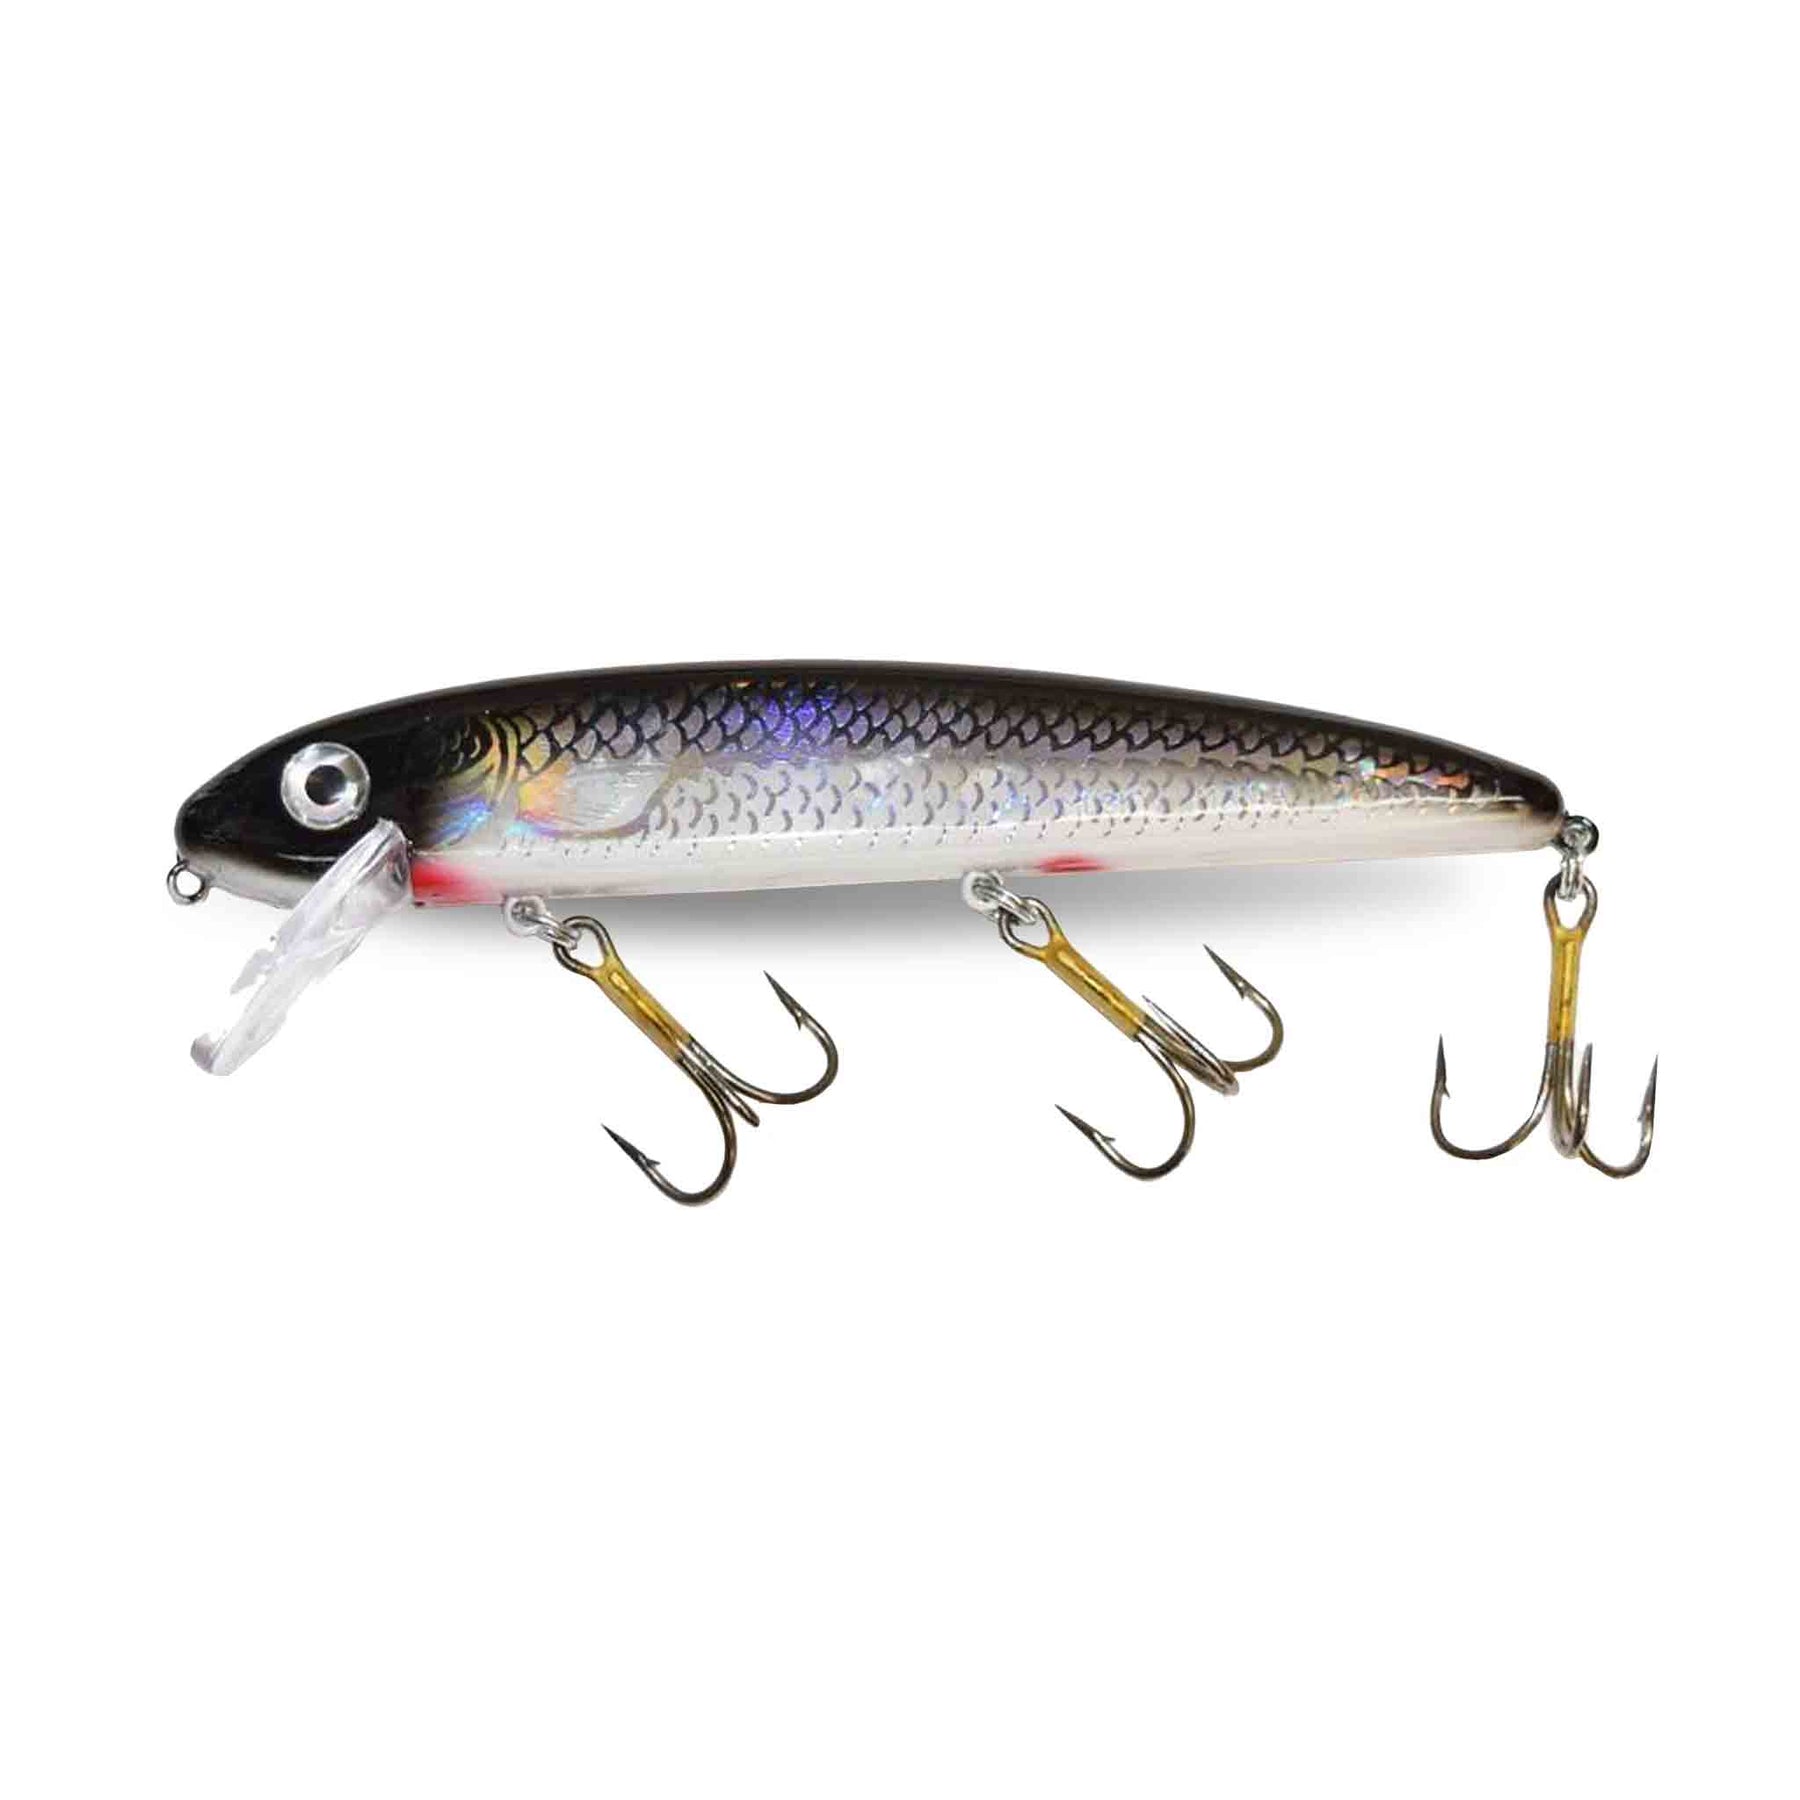 View of Crankbaits Musky Mania Tackle Jake 10'' Crankbait Sliver Shiner Holoform available at EZOKO Pike and Musky Shop